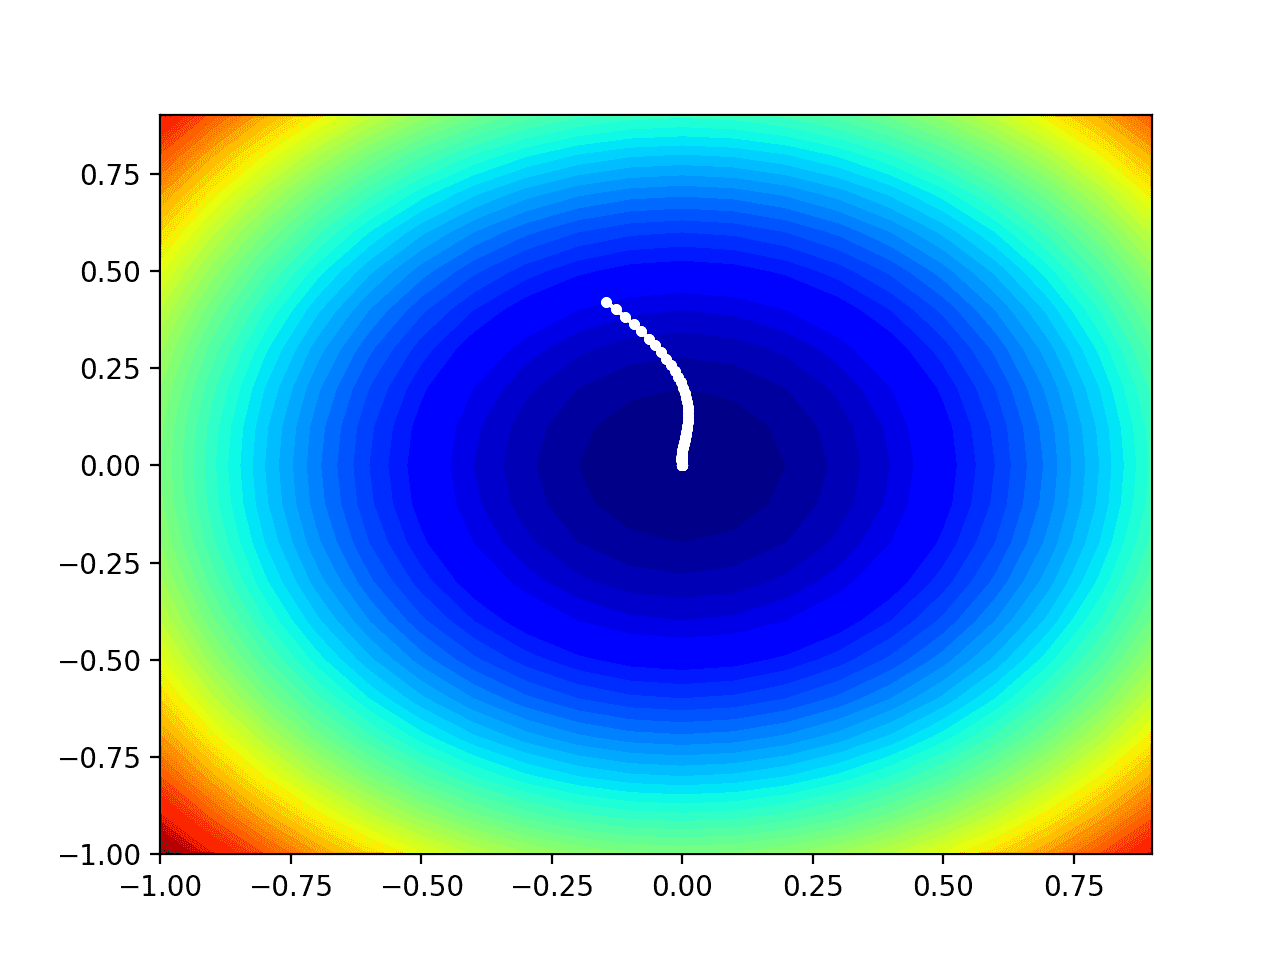 Contour Plot of the Test Objective Function With AdaMax Search Results Shown